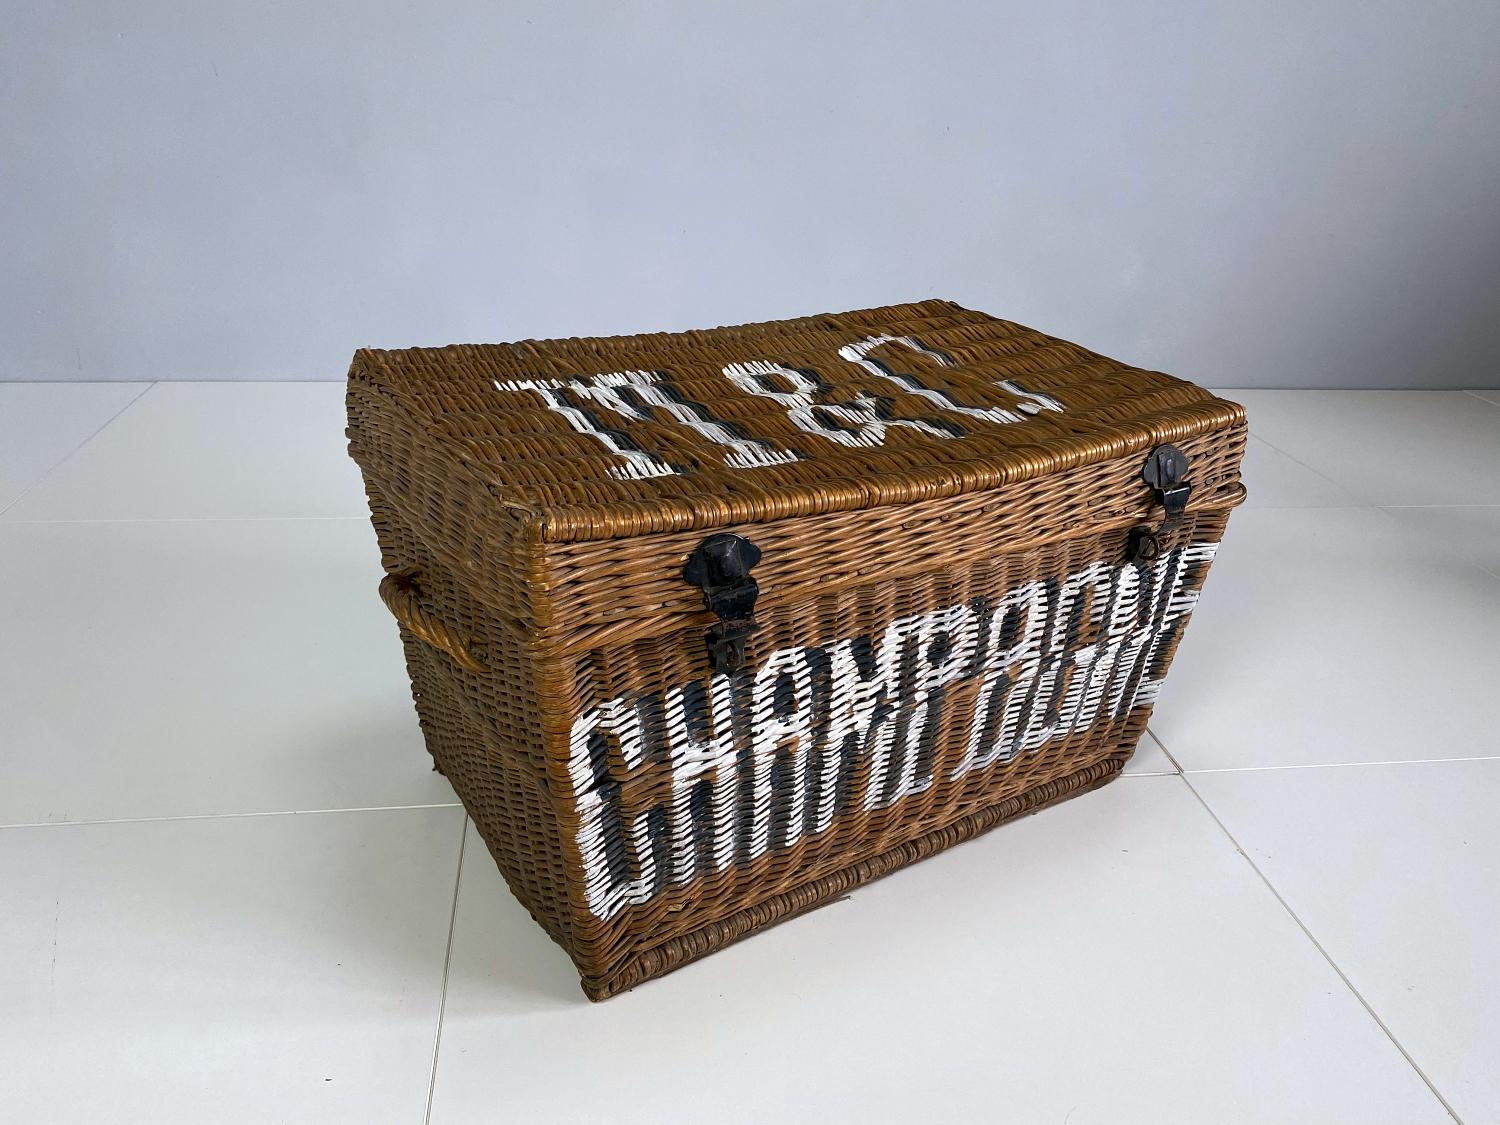 Early unique wicker trunk handmade in France in 1930s. The woven willow wicker trunk has a lid with two locks and two handles. The basket is in good condition with wormholes & nice patina. It was used as a champagne bottle chest.
We found this